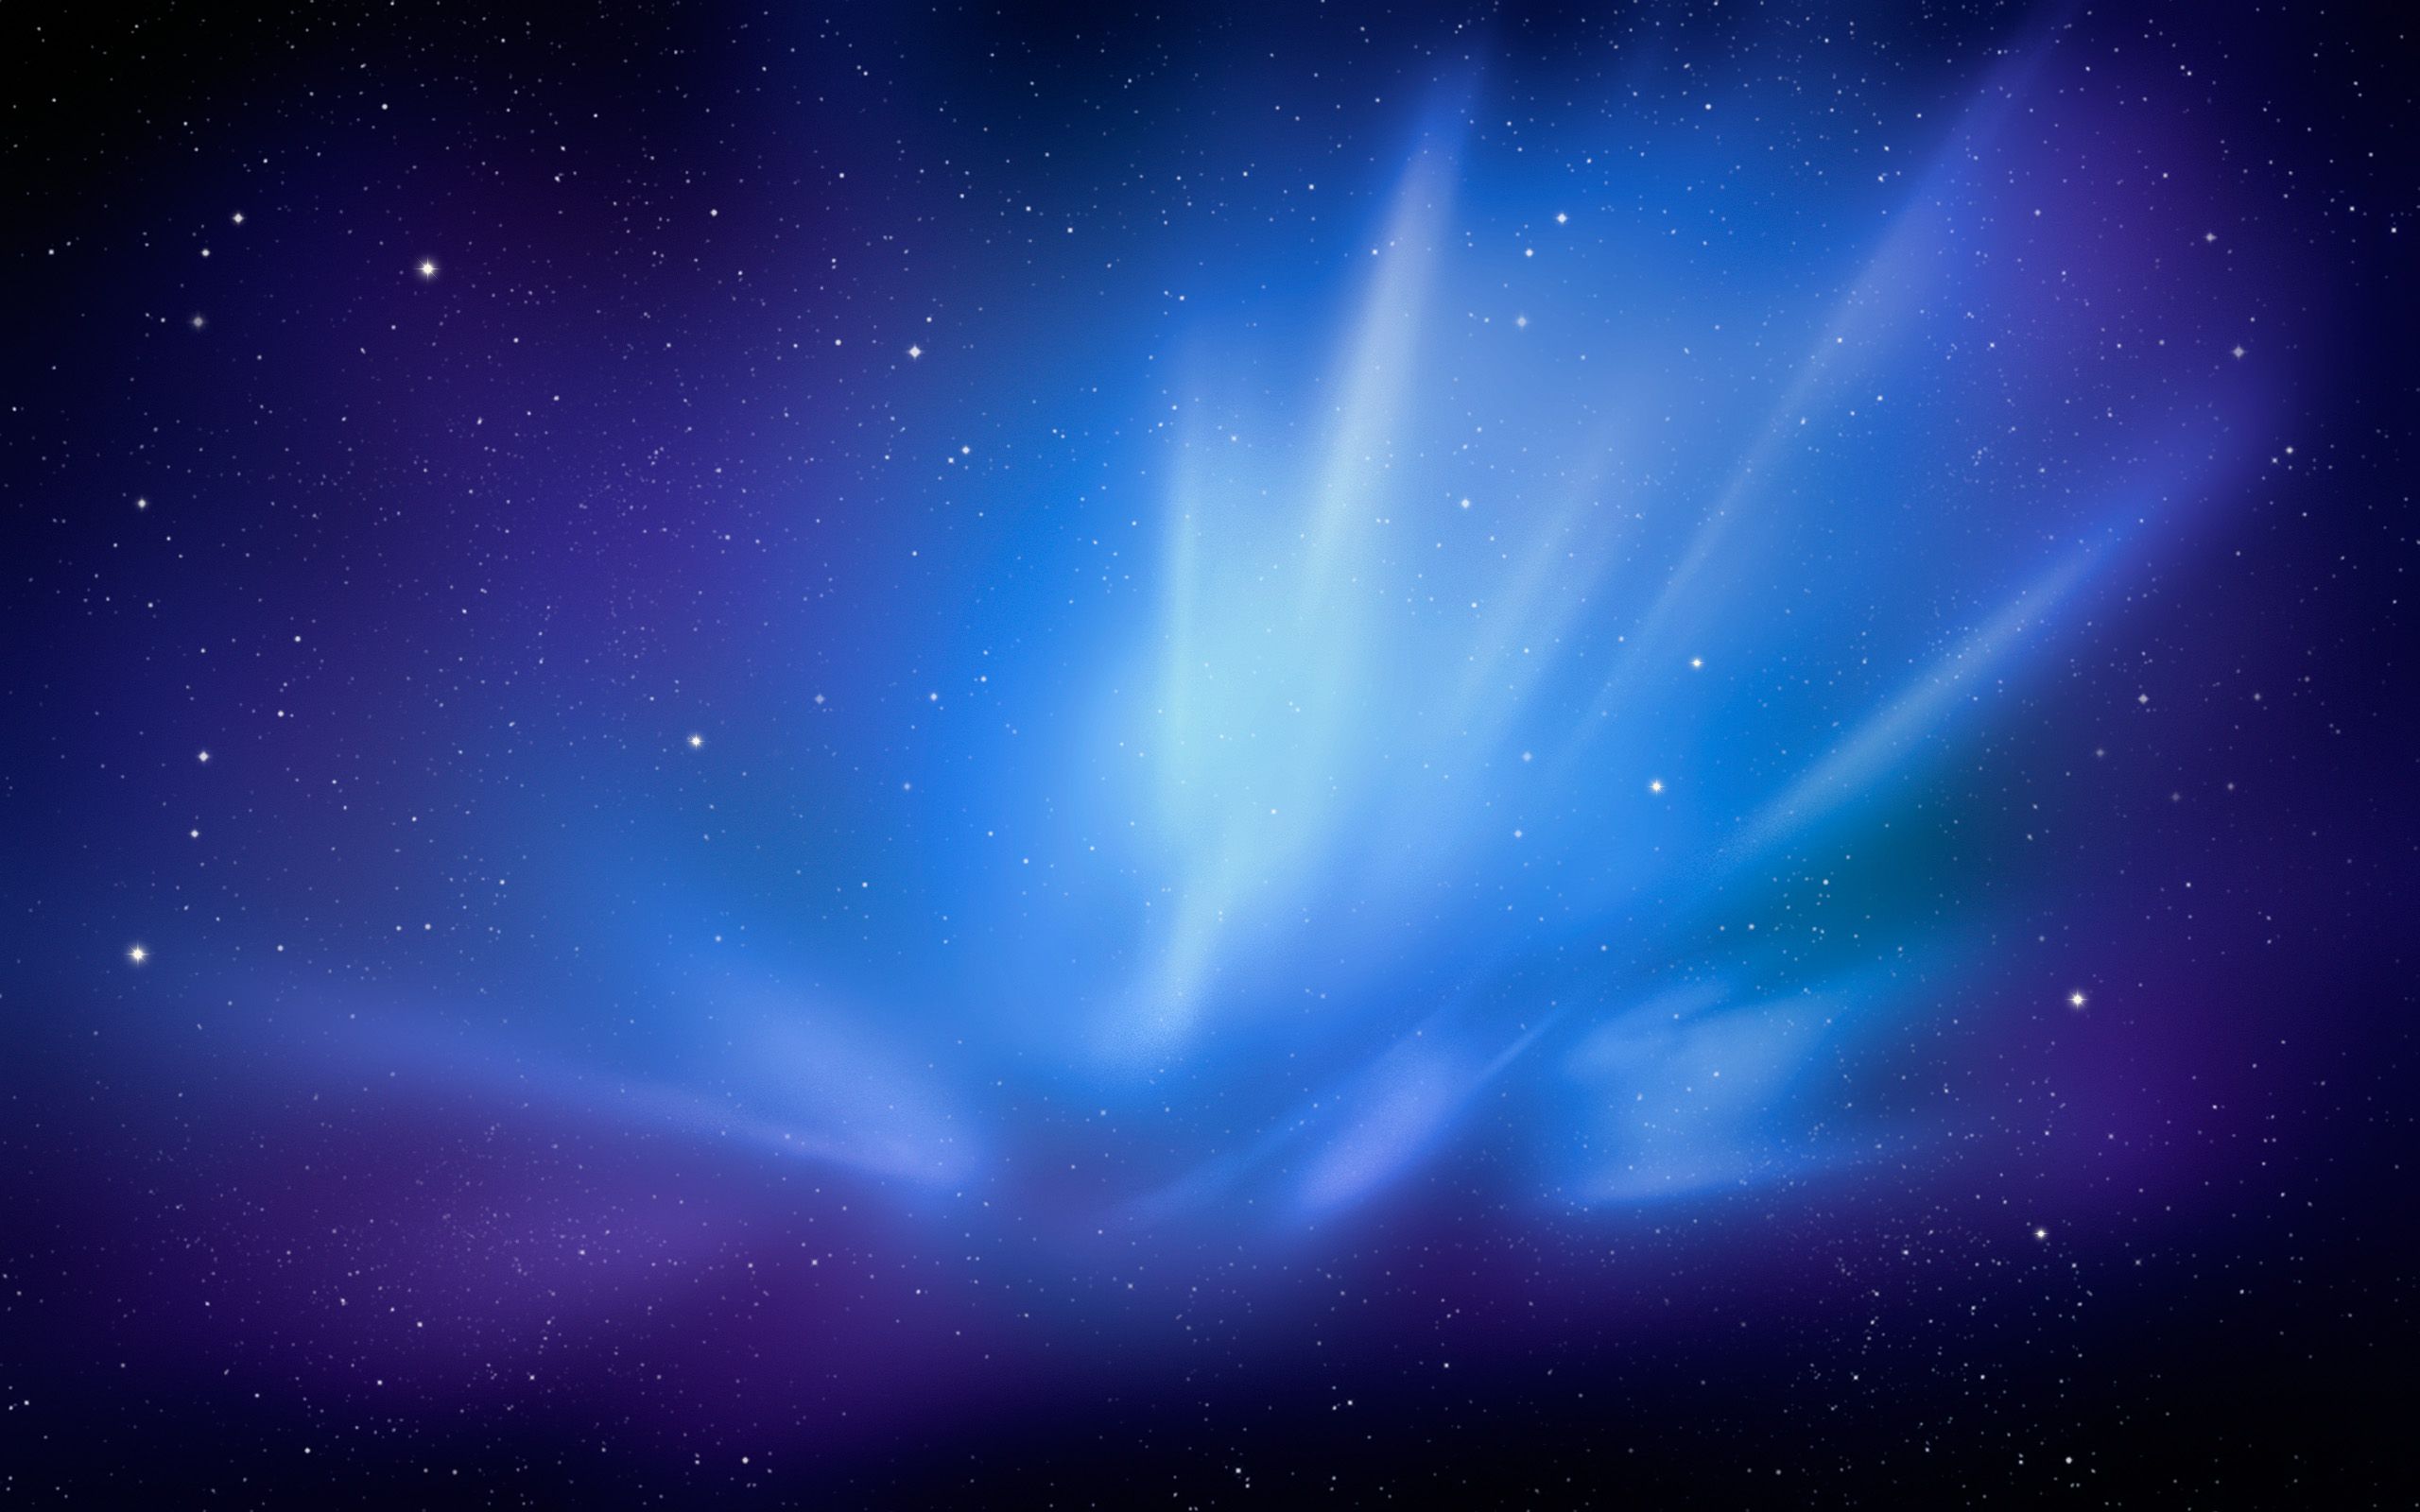 15 Awesome High Resolution Wallpapers to Spice Up Your Desktop